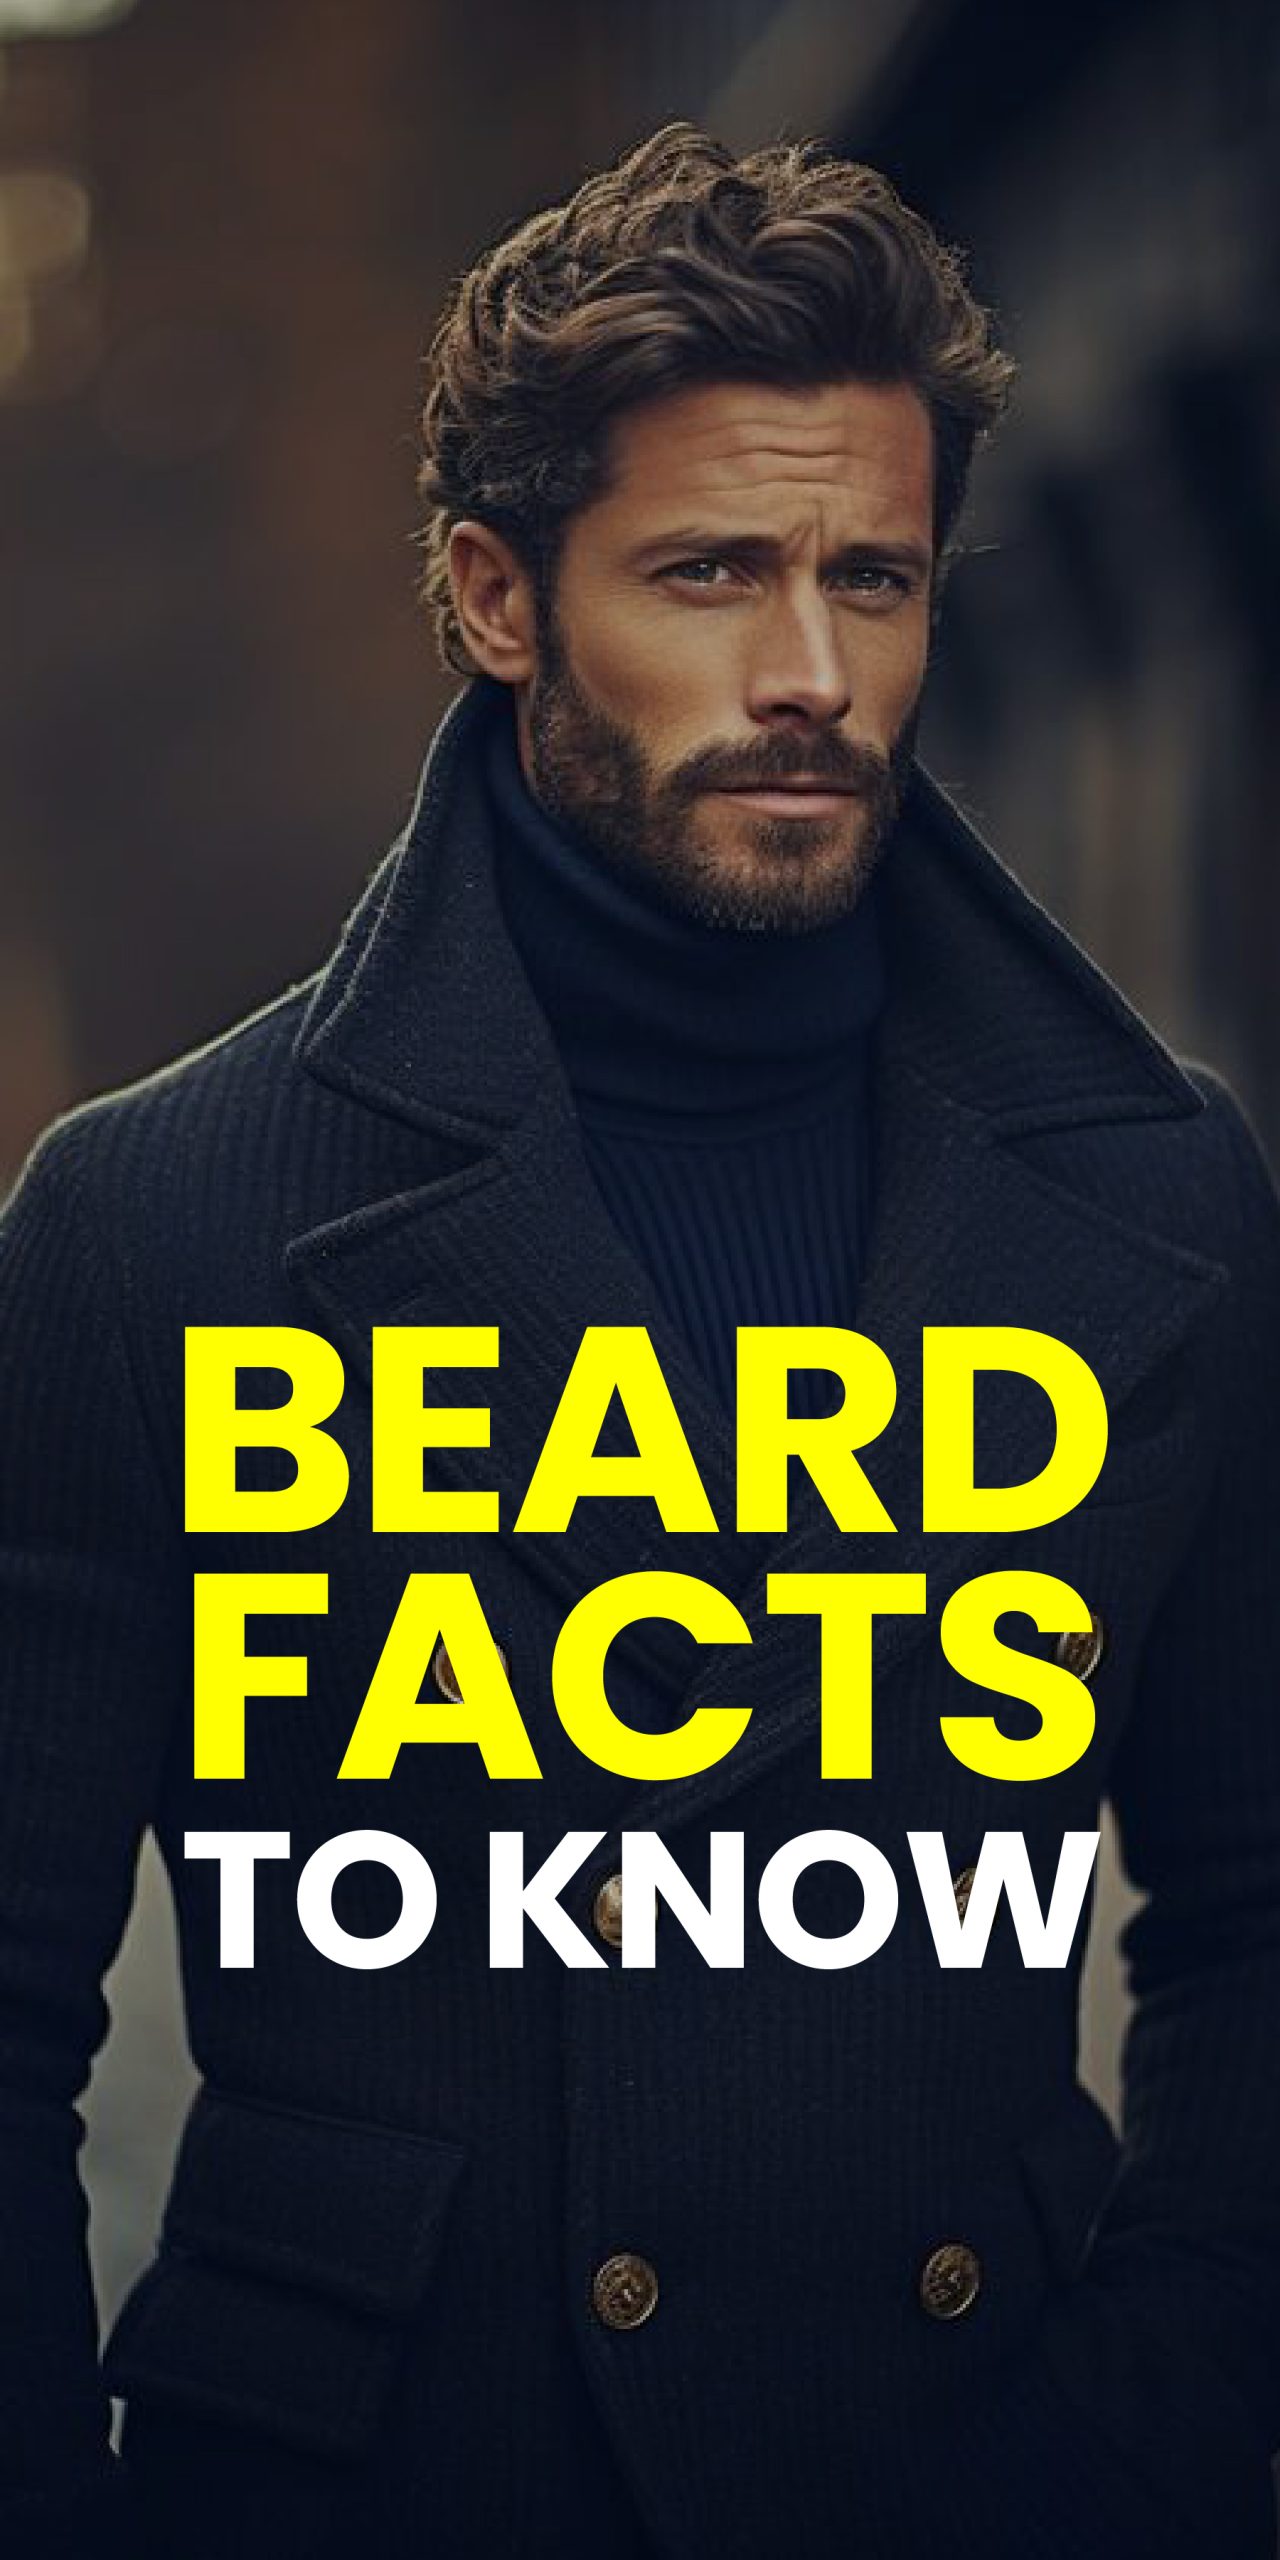 BEARD FACTS TO KNOW